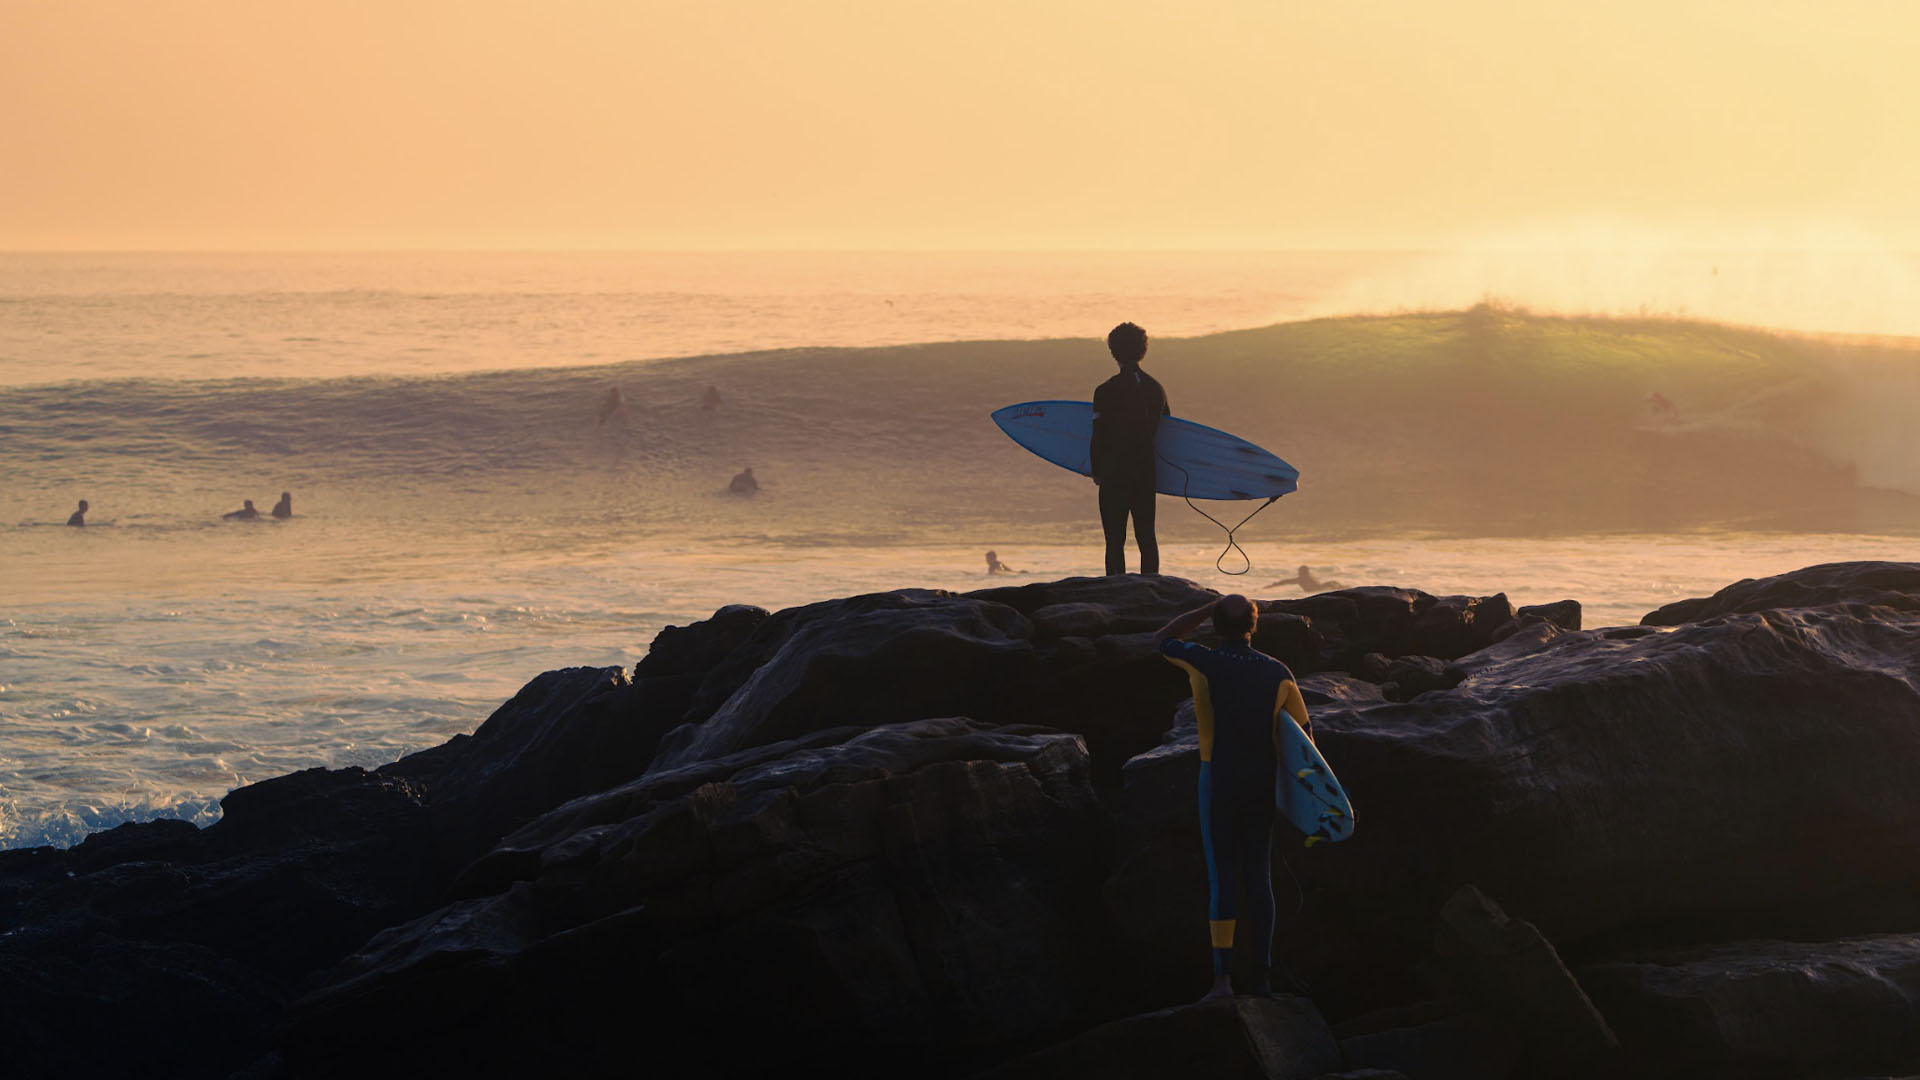 Surfing for Life - 10 Benefits of Surfing That Will Keep You Going